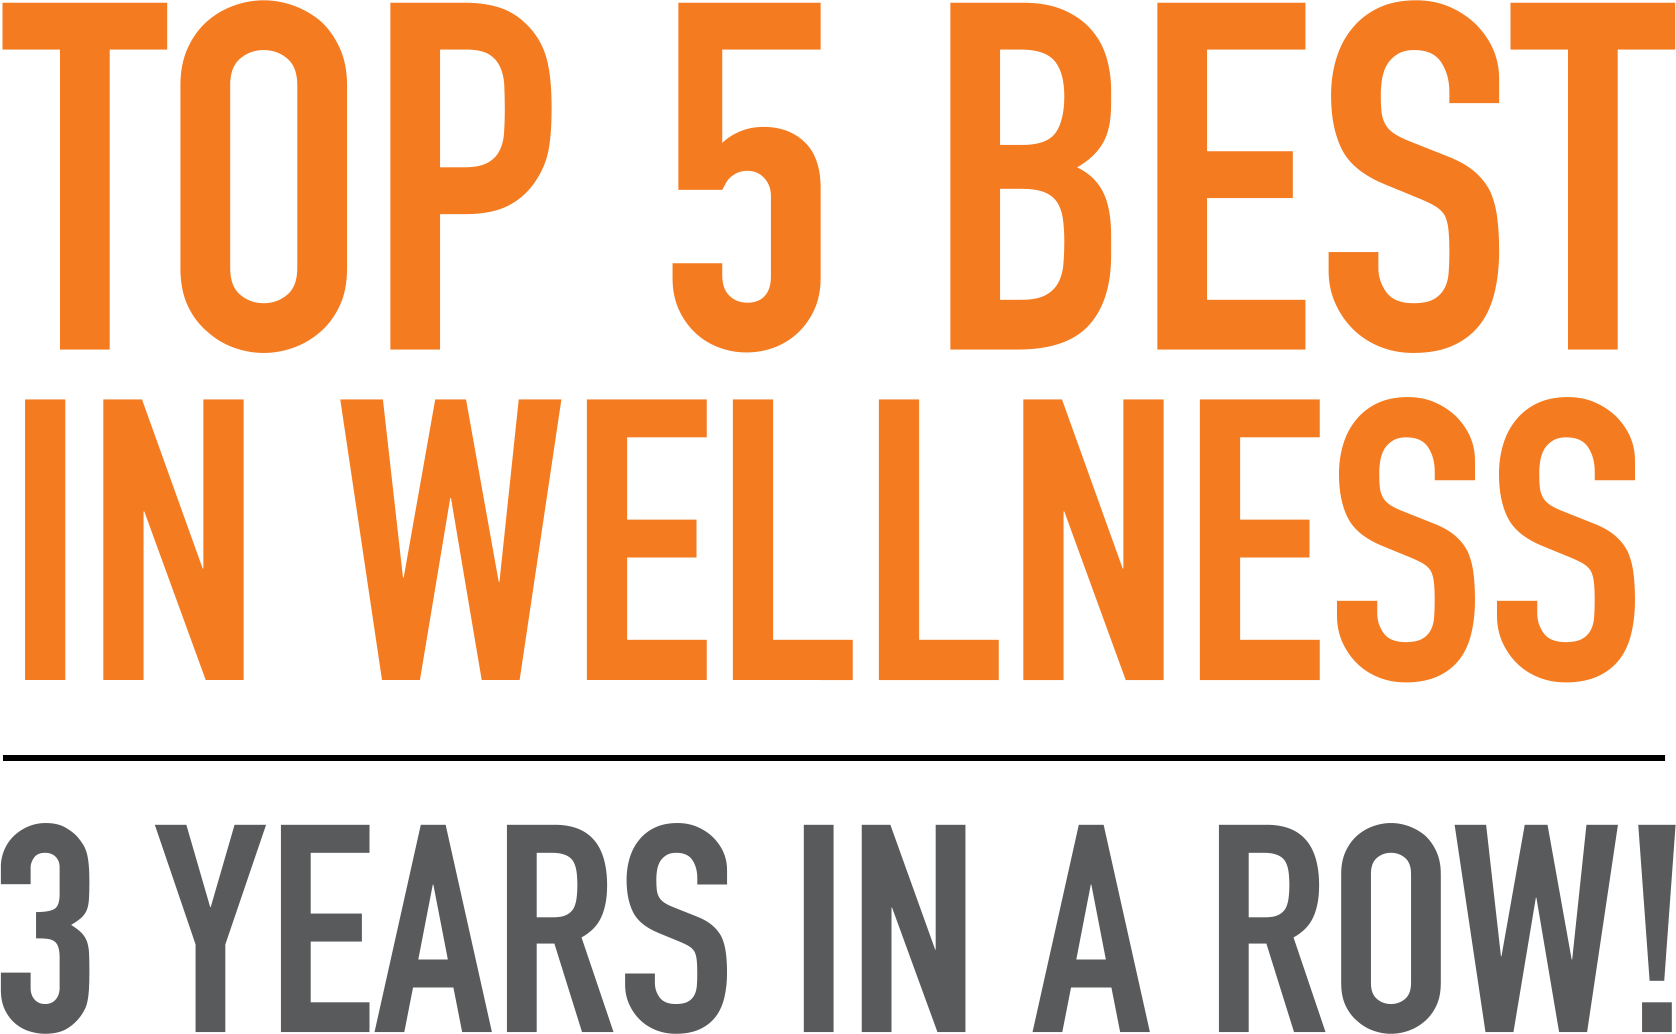 Top 5 best in wellness - 3 years in a row